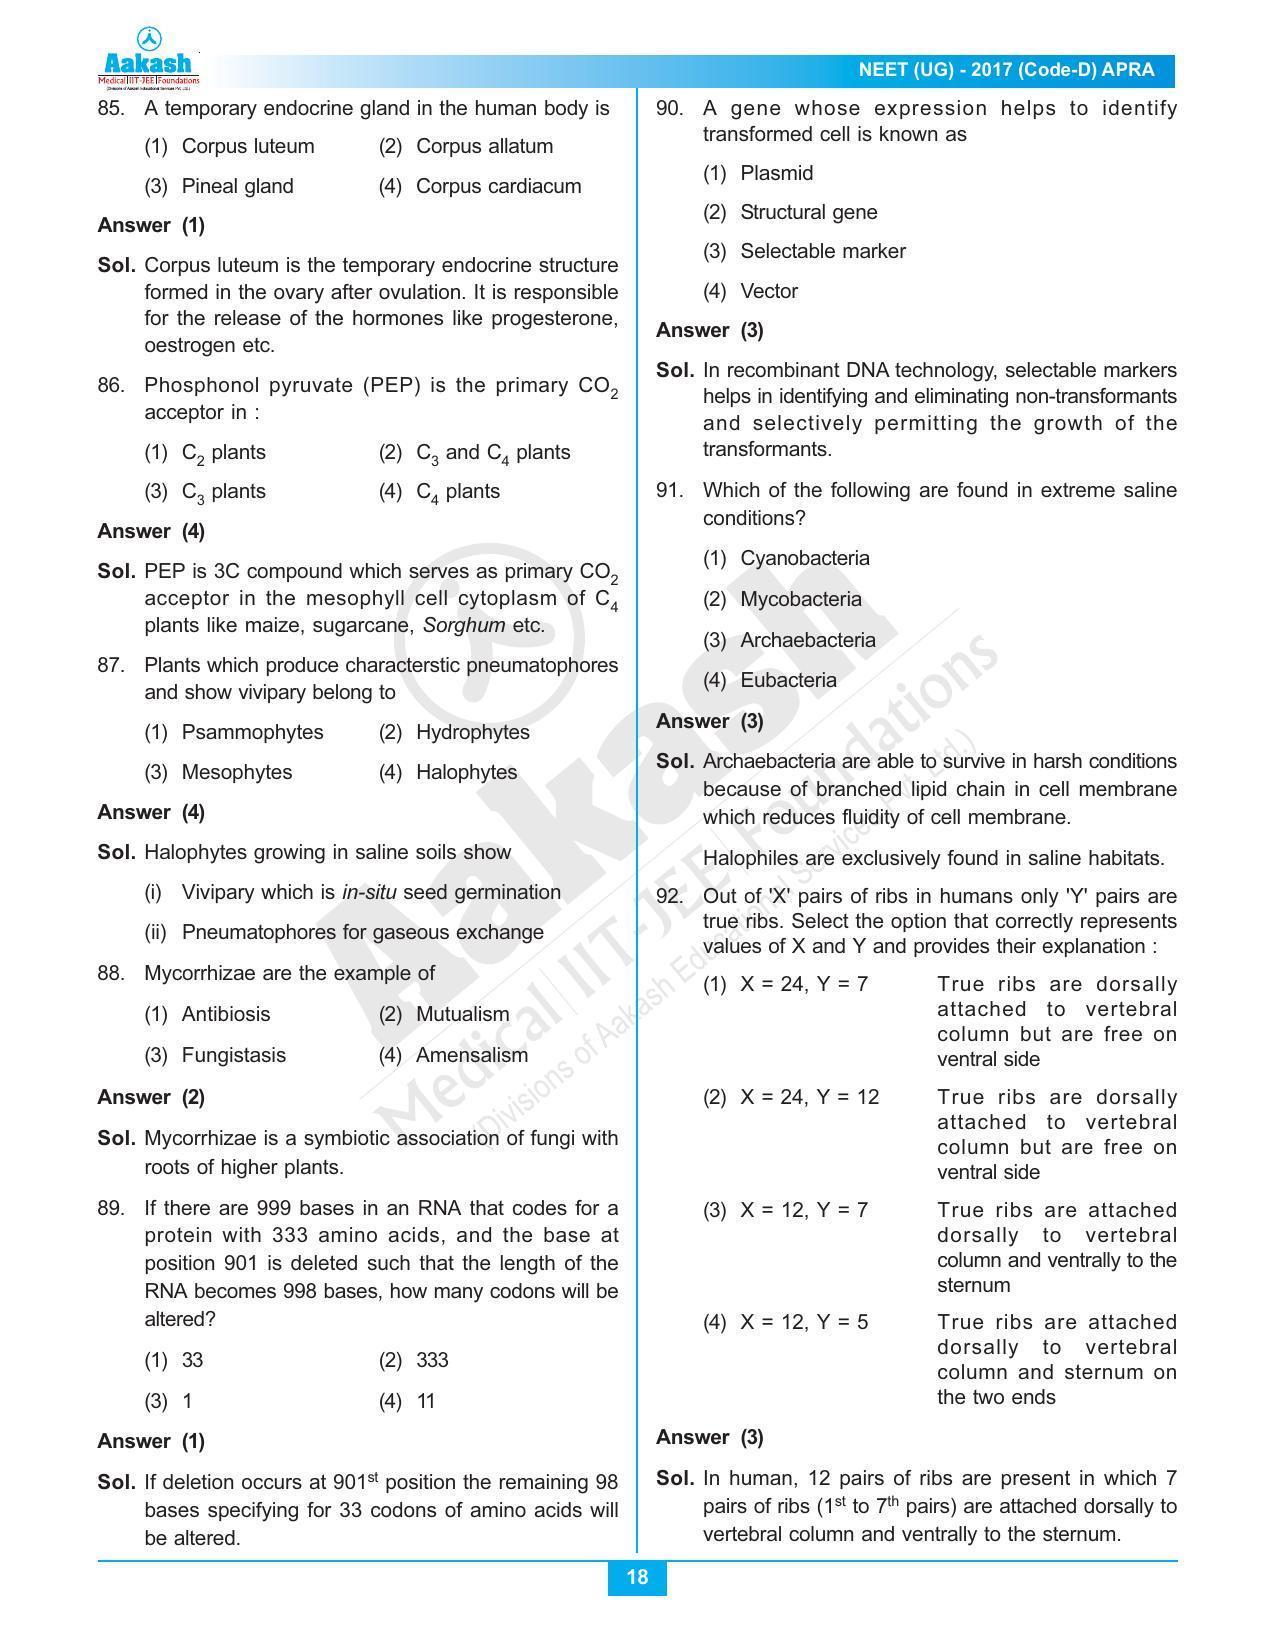  NEET Code D 2017 Answer & Solutions - Page 18